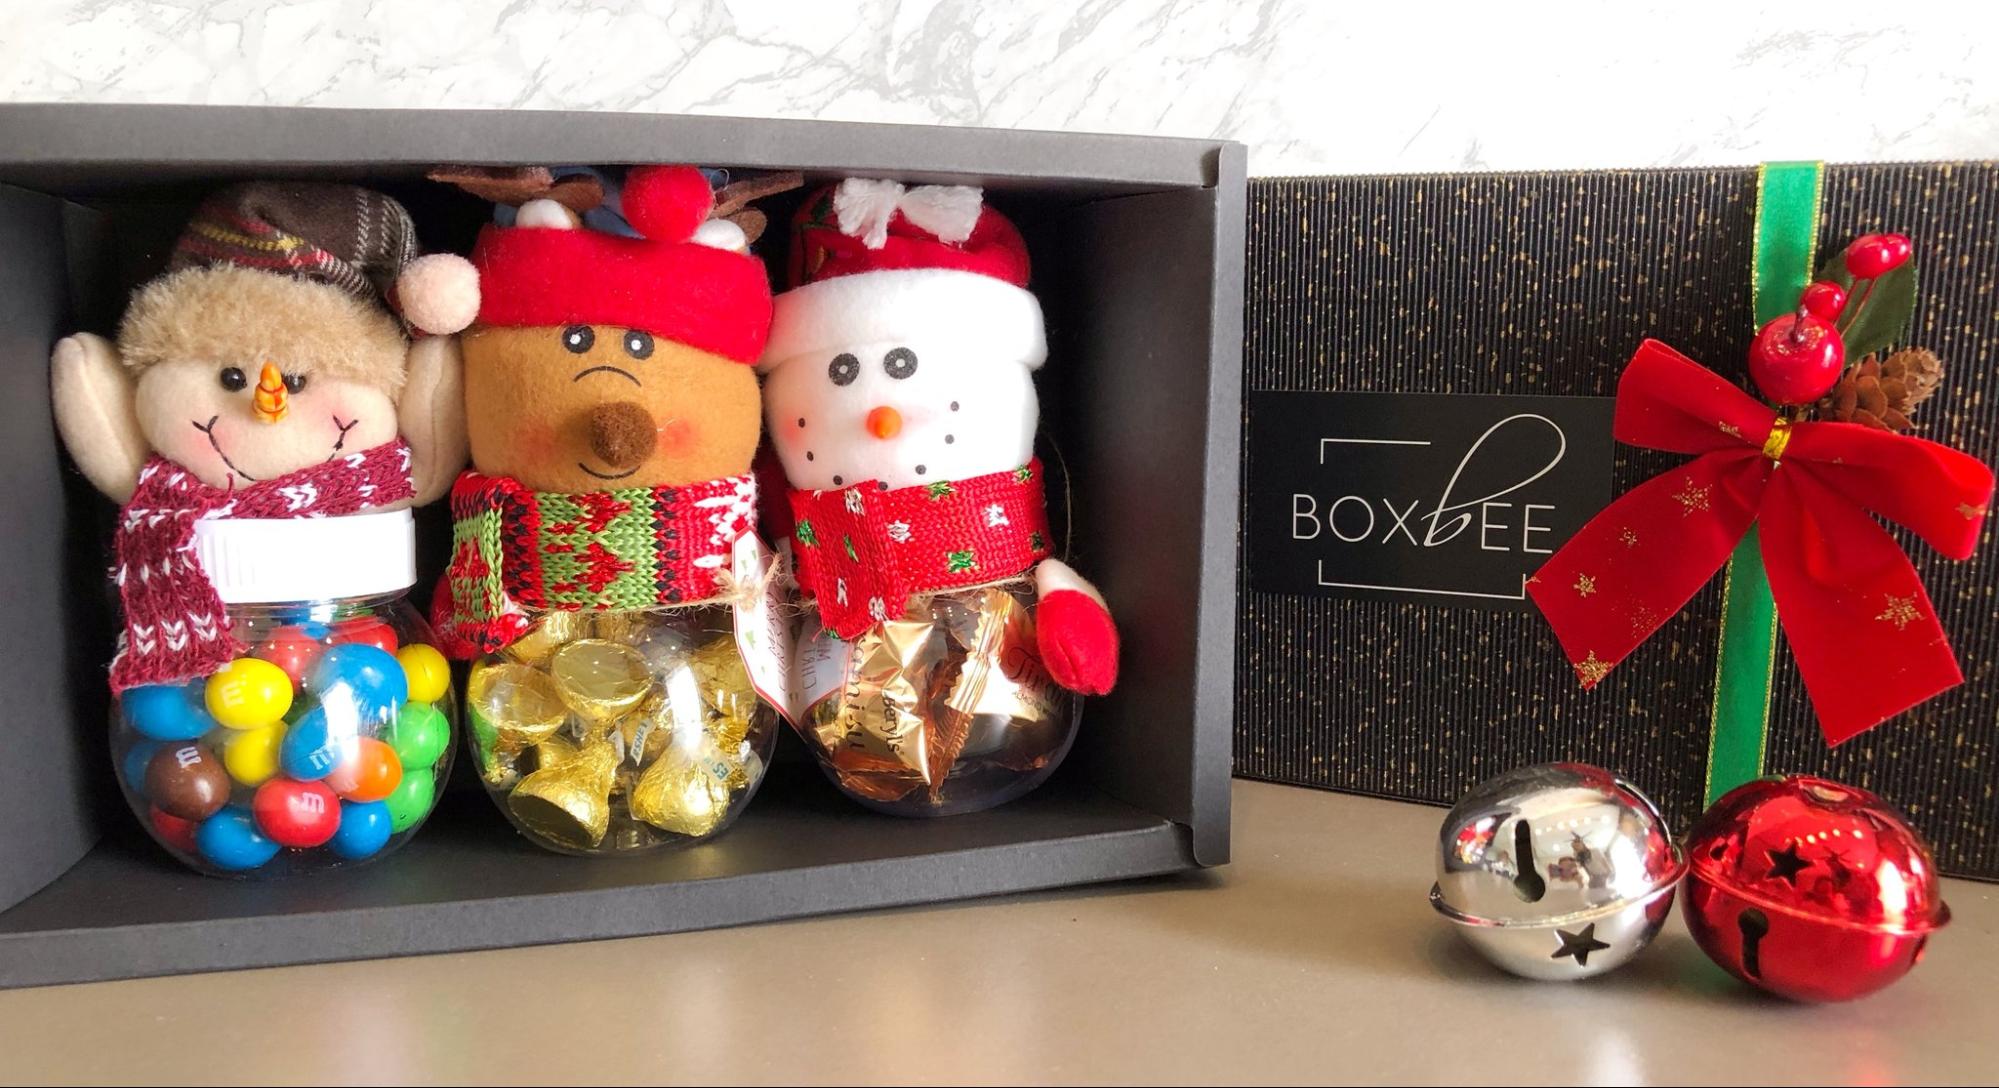 BoxBee Christmas-themed subscription boxes